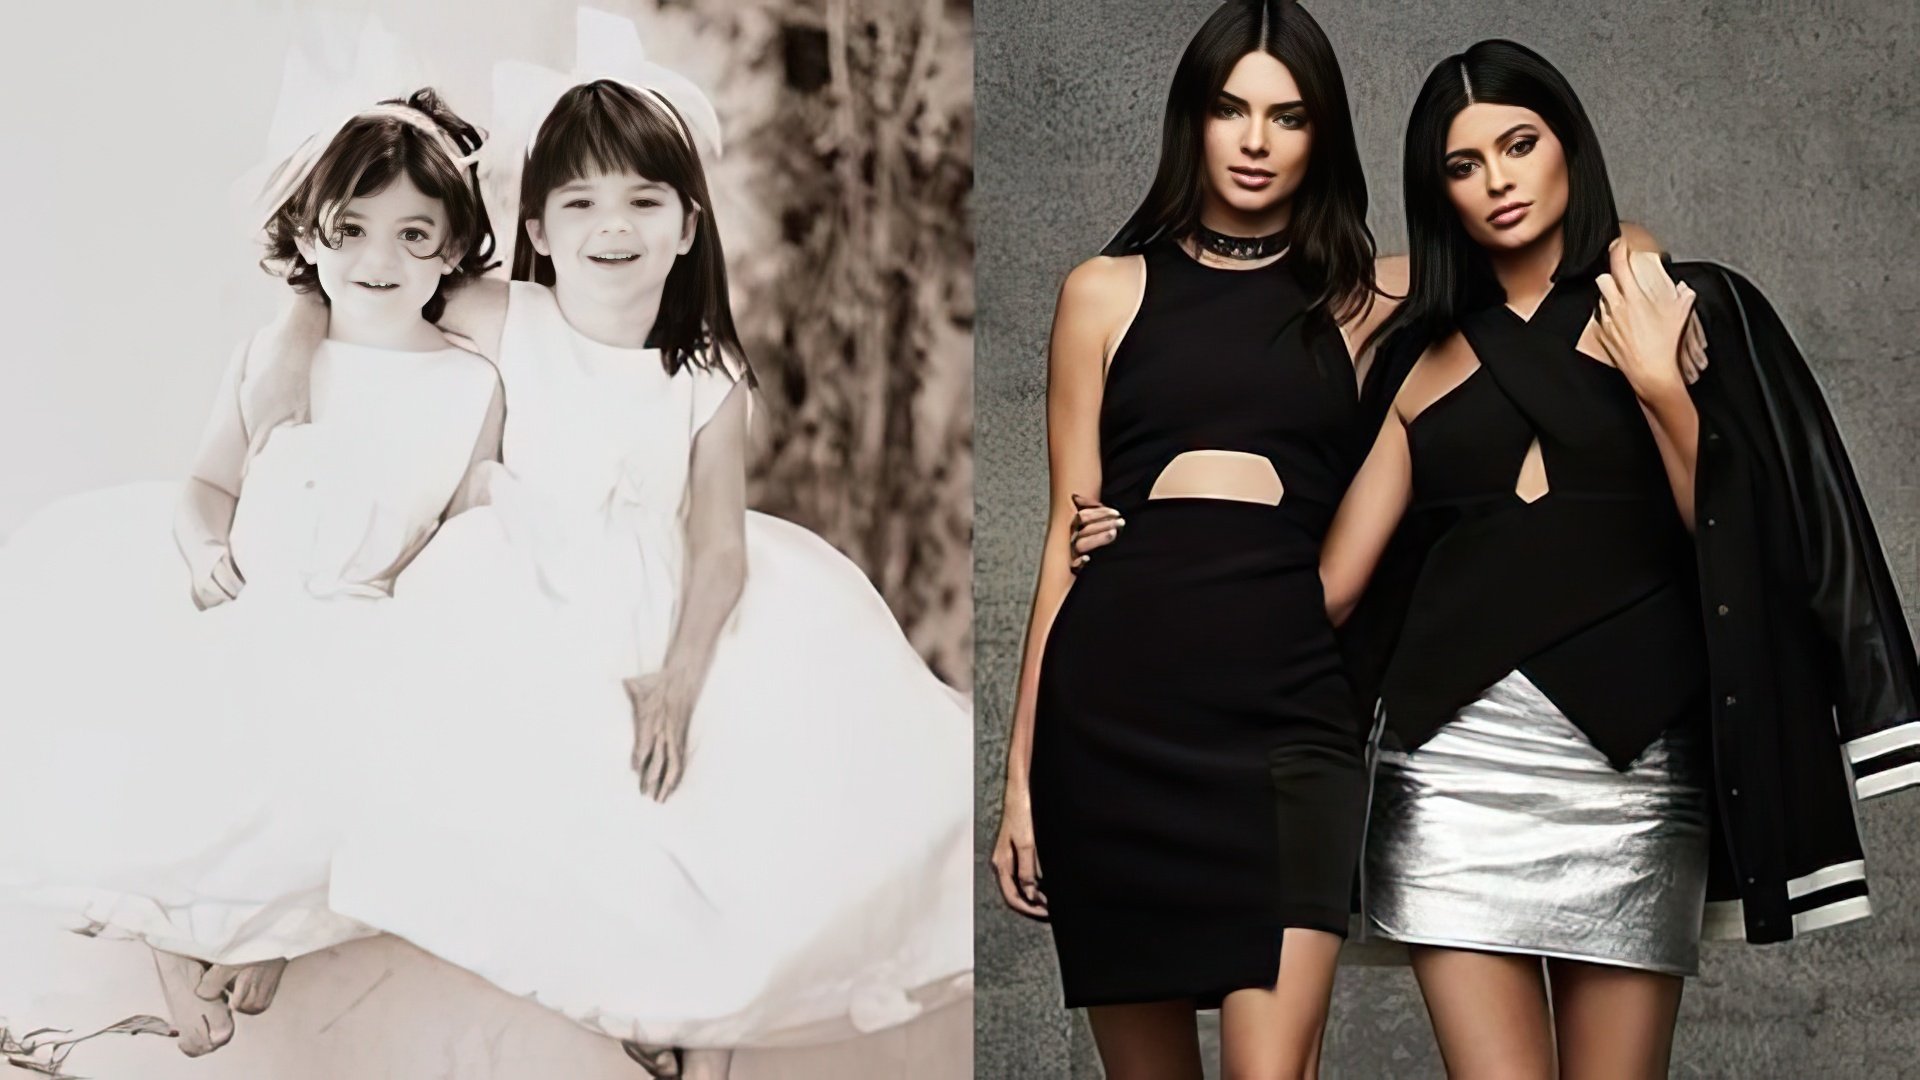 Kylie and Kendall Jenner as a child and now